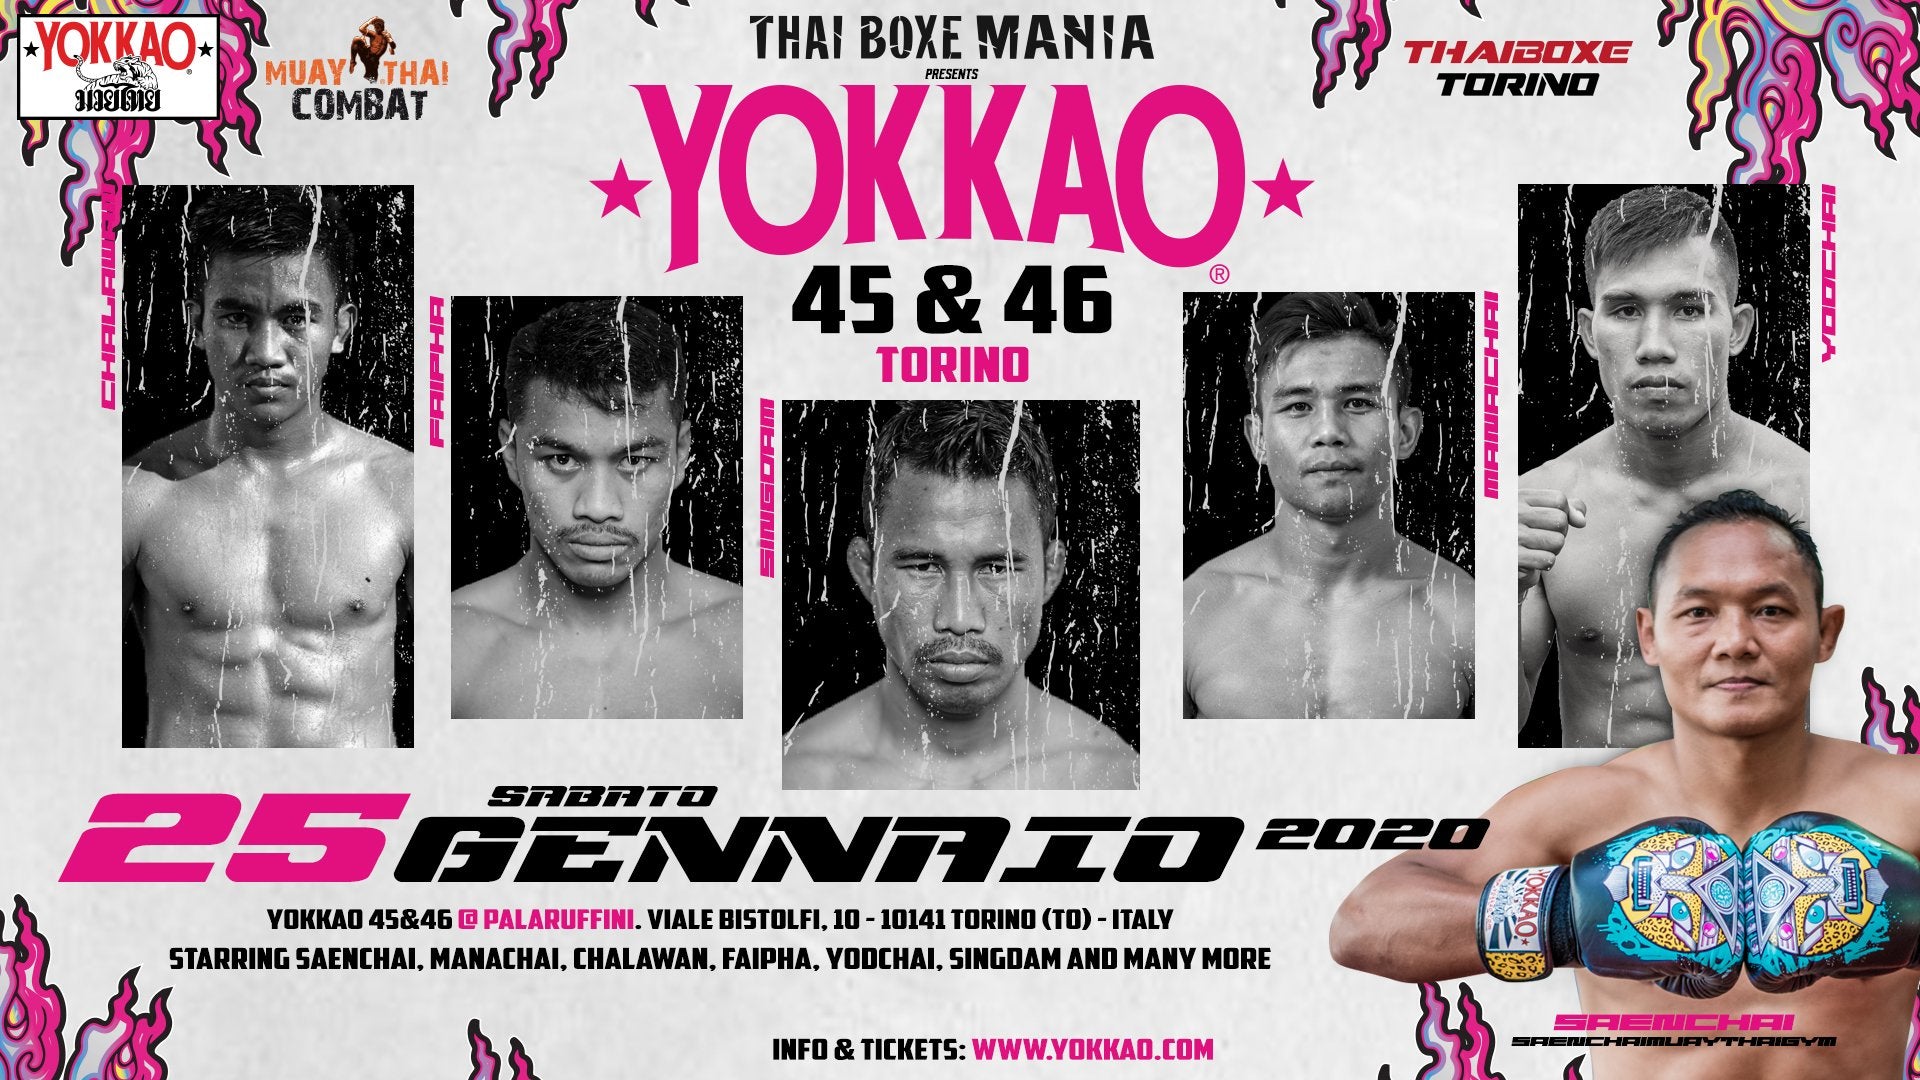 Breaking: First Six Fighters Announced for YOKKAO 45-46!